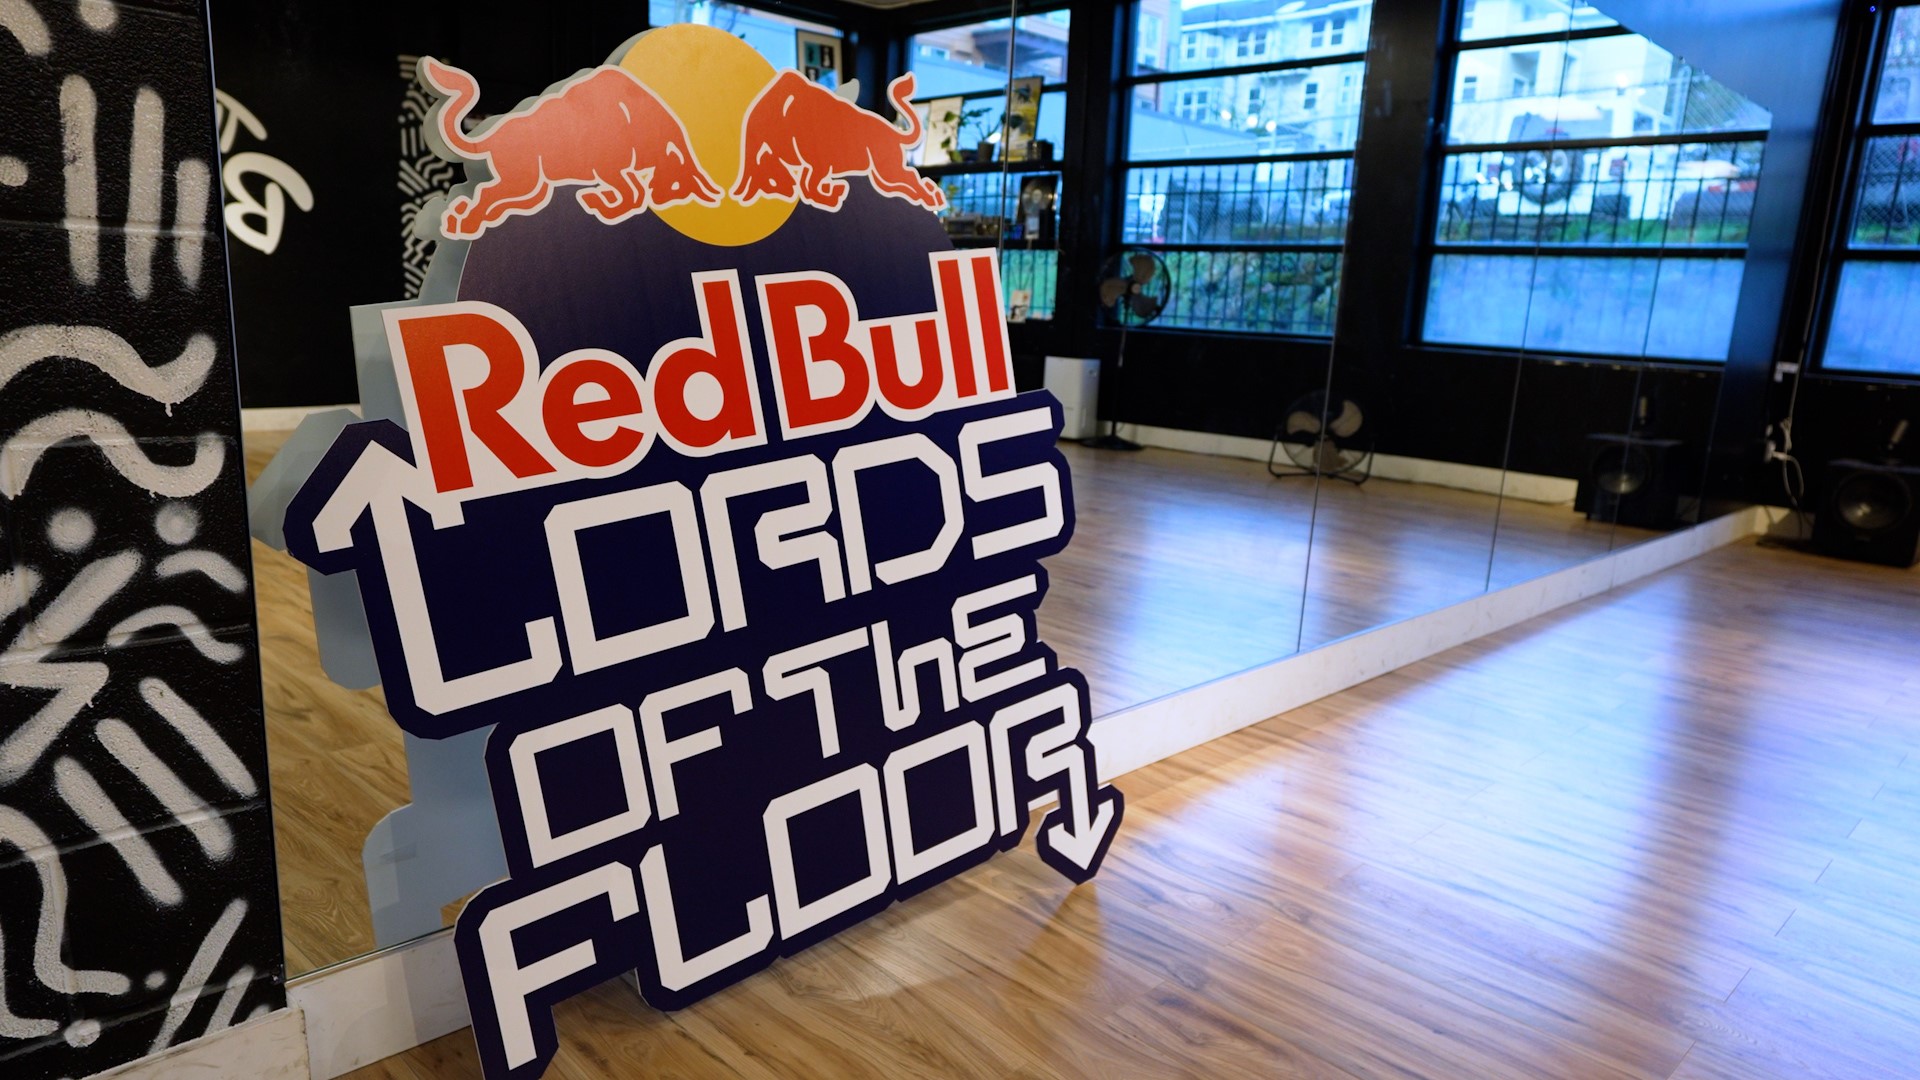 Red Bull Lords of the floor, breaking since 2001. #k5evening